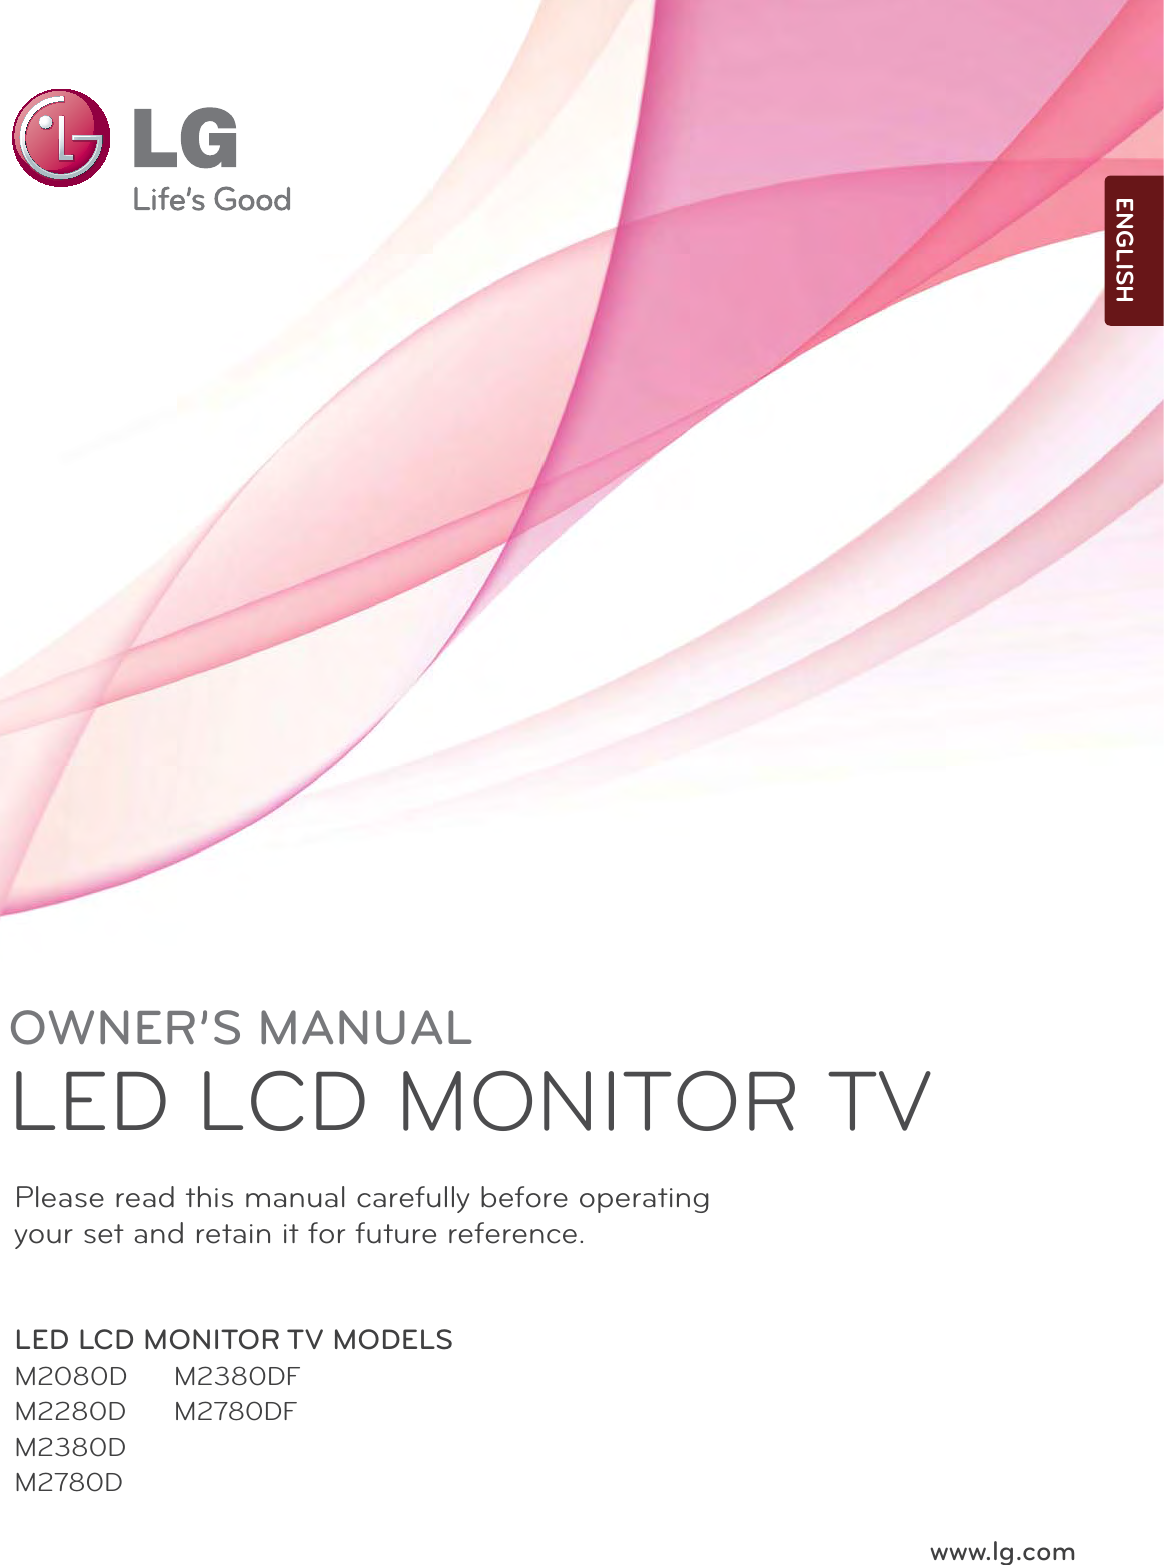 www.lg.comOWNER’S MANUALLED LCD MONITOR TVLED LCD MONITOR TV MODELSM2080DM2280DM2380DM2780DM2380DFM2780DFPlease read this manual carefully before operatingyour set and retain it for future reference.ENGLISH